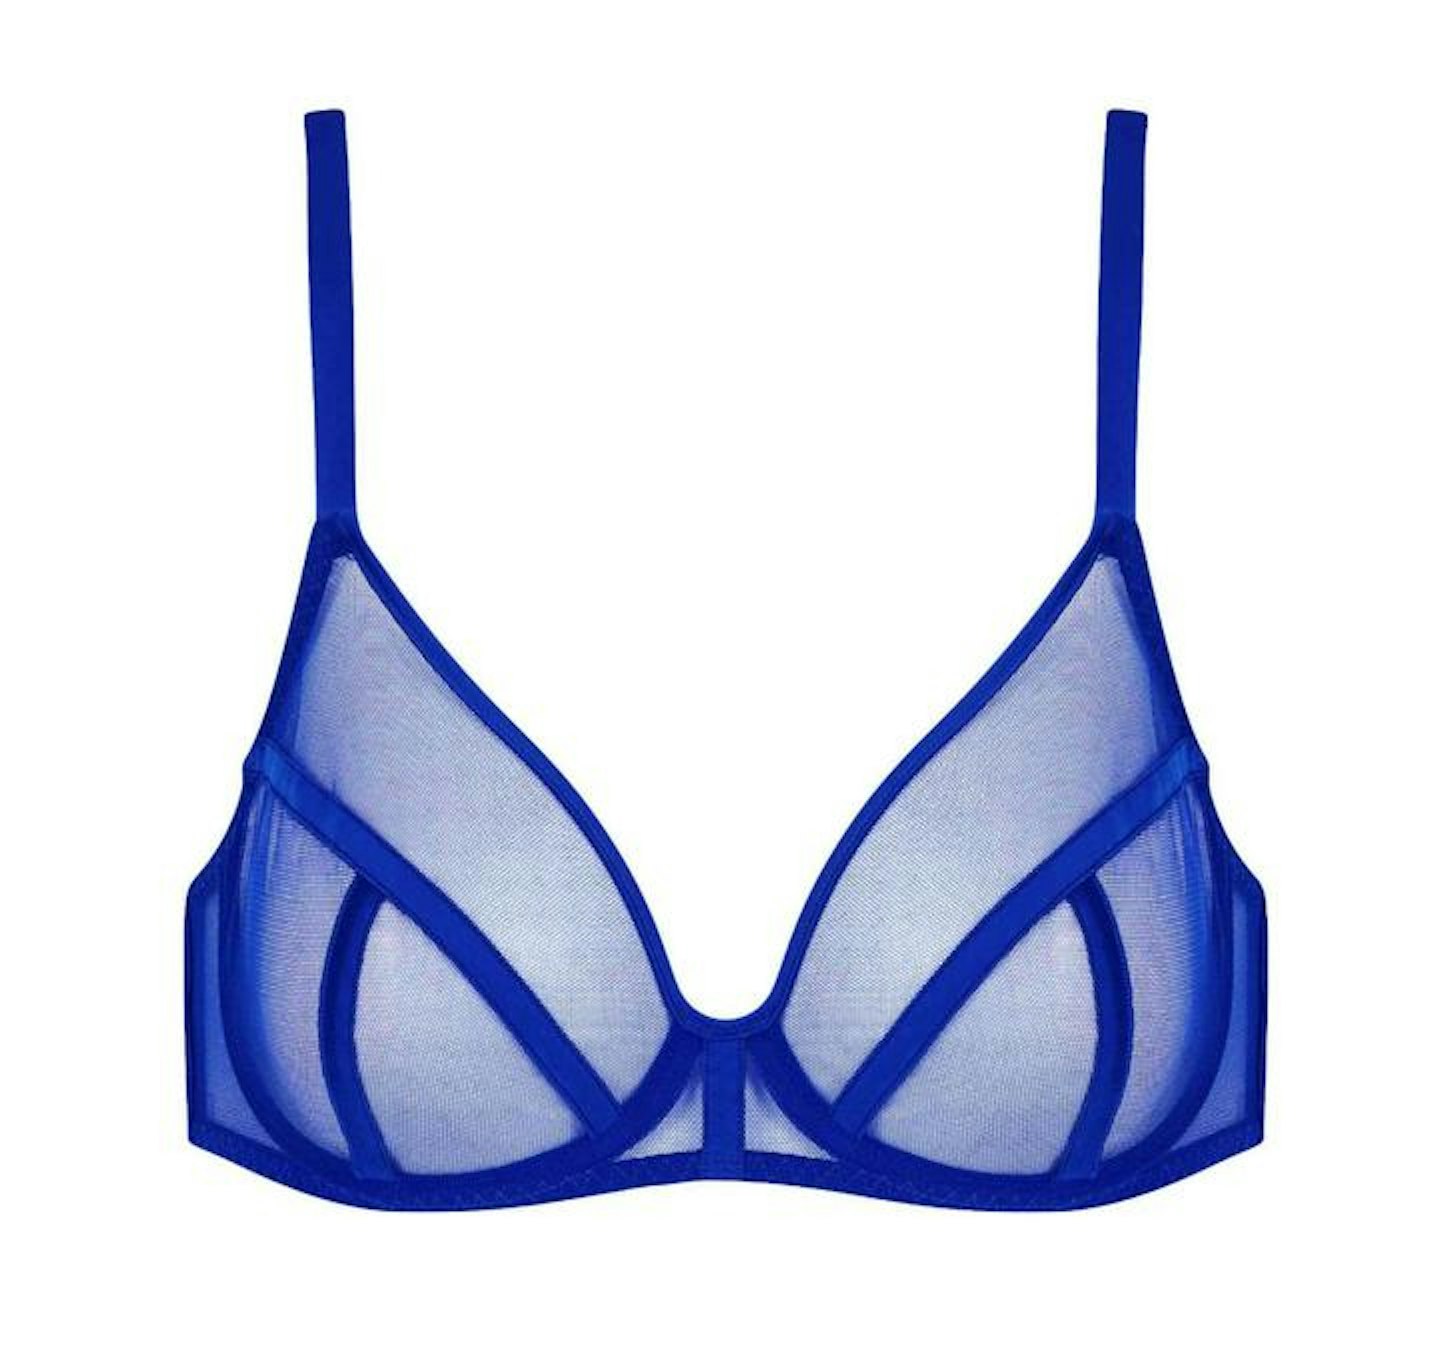 The Best Colourful Bras For AA-H Cups – Beija London